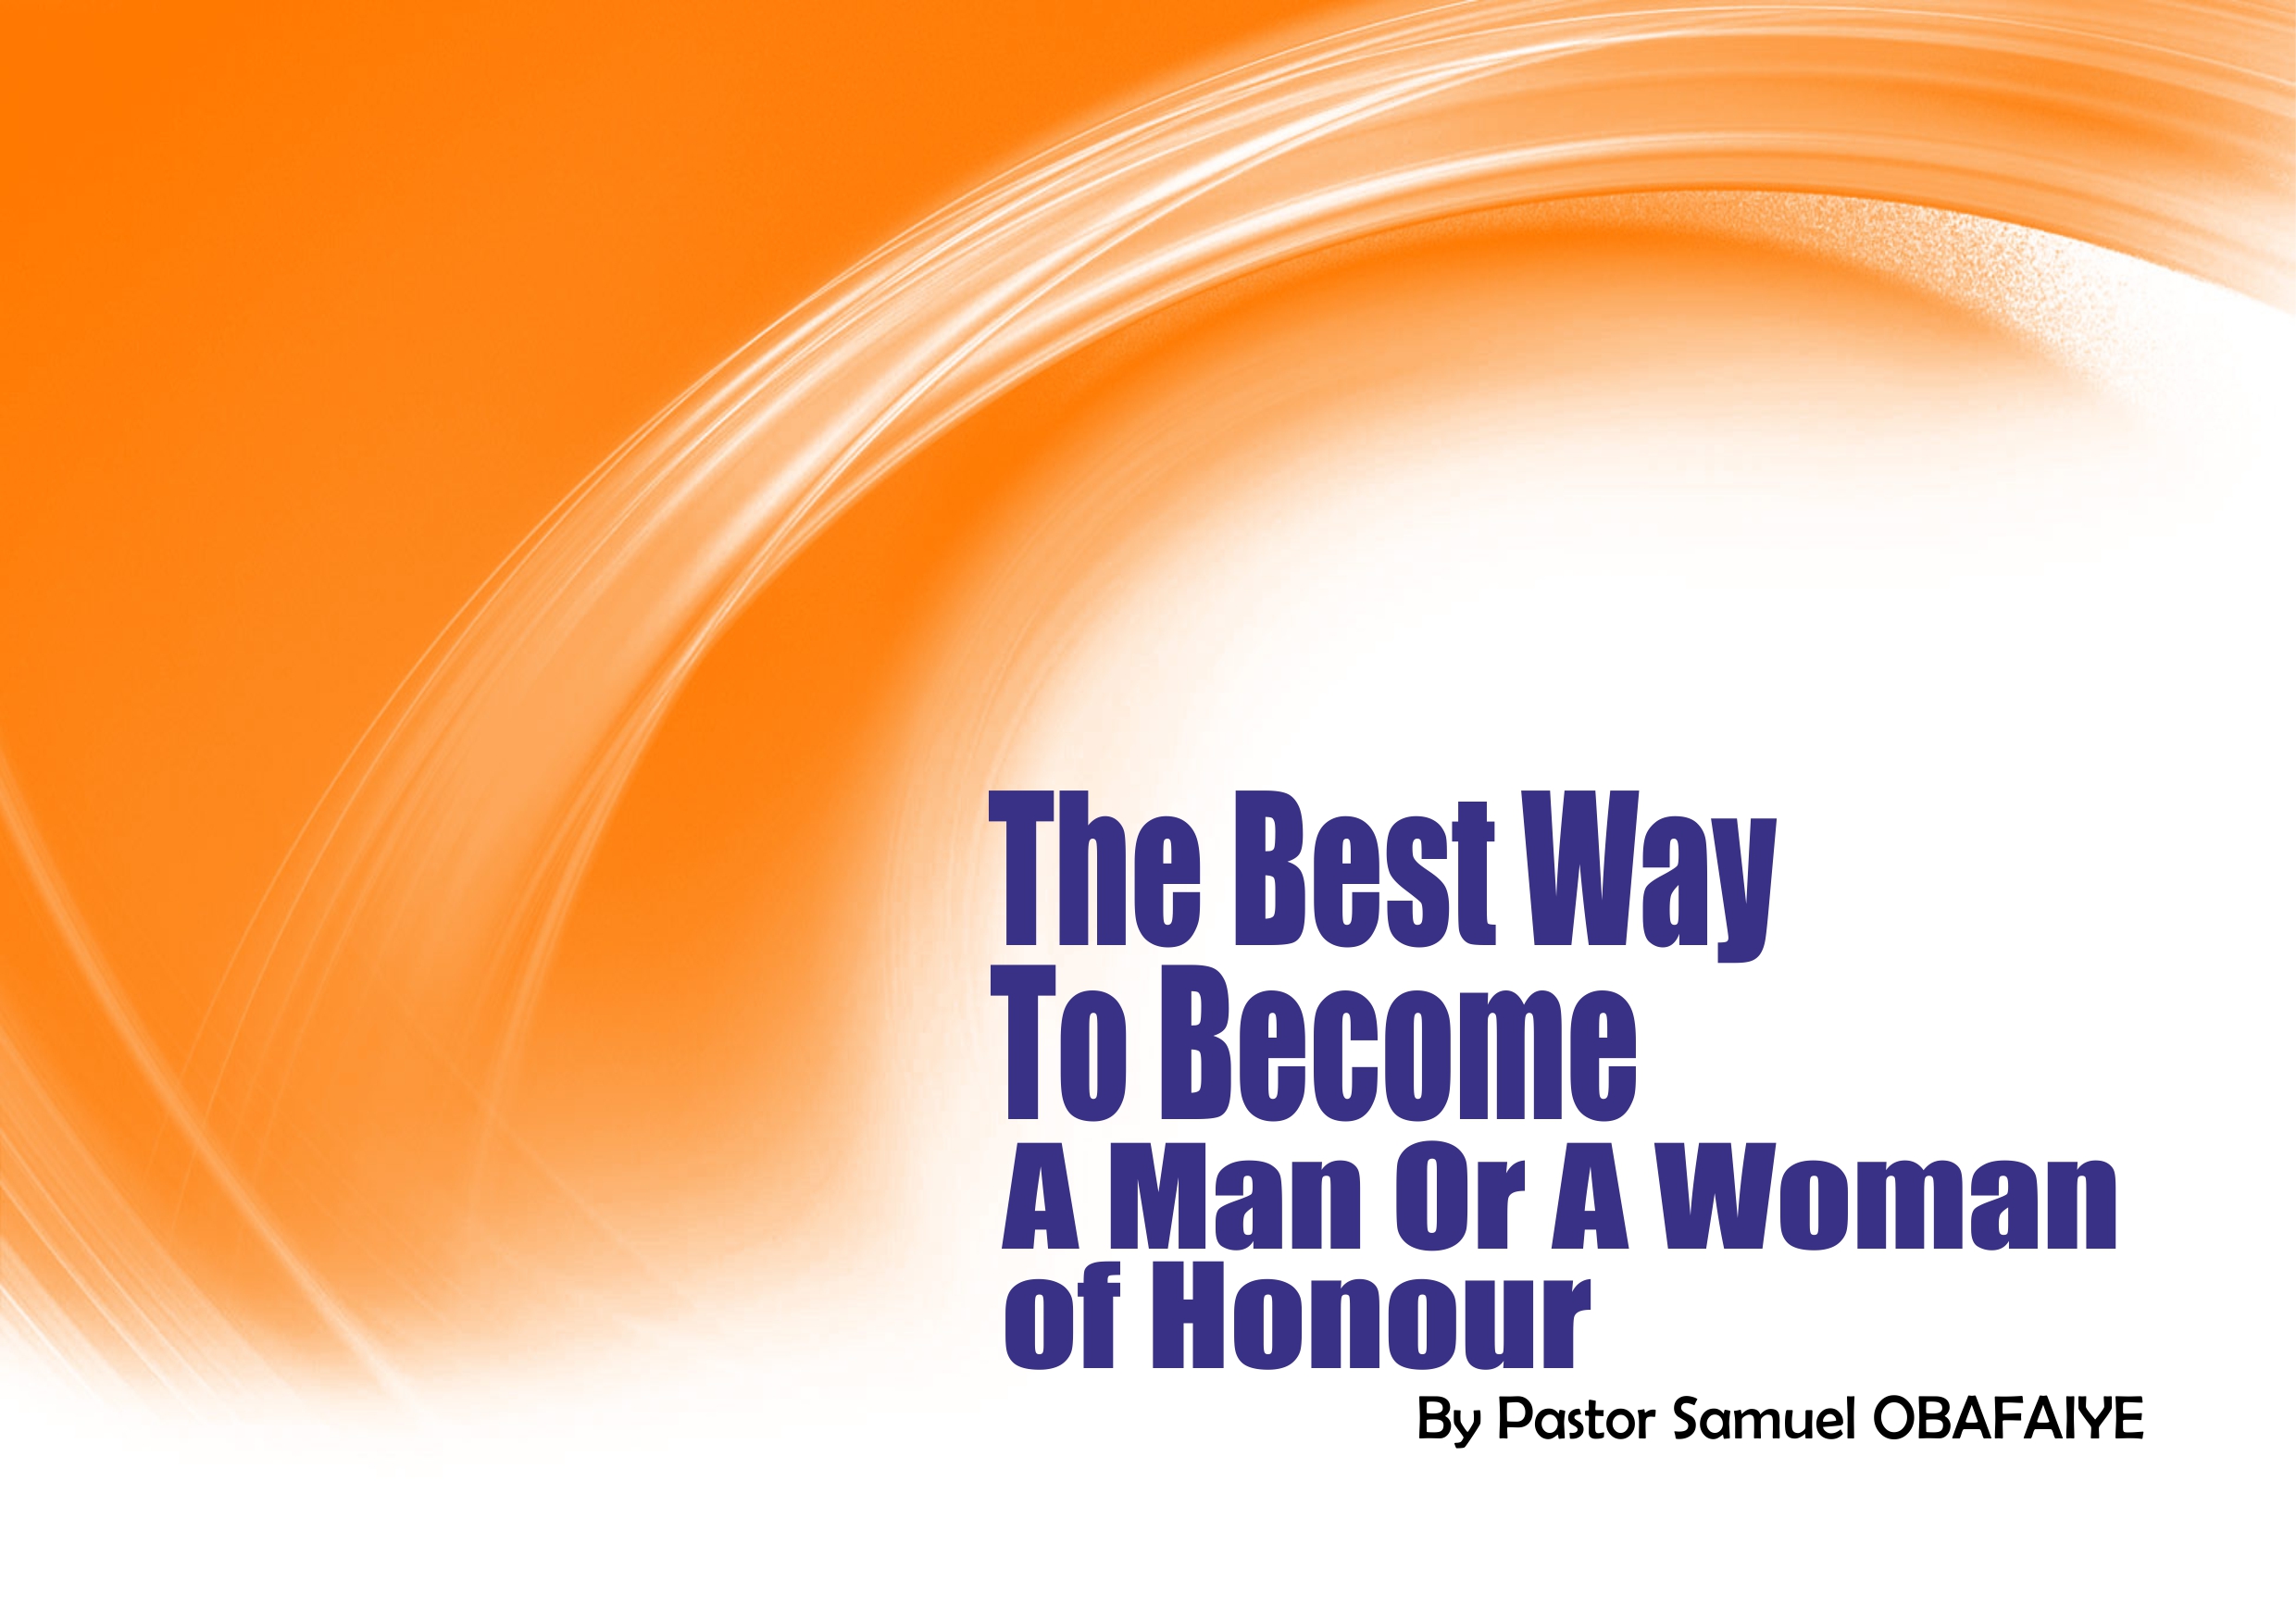 The Best Way to Become a Man or a Woman of Honour, by Pastor Samuel Obafaiye